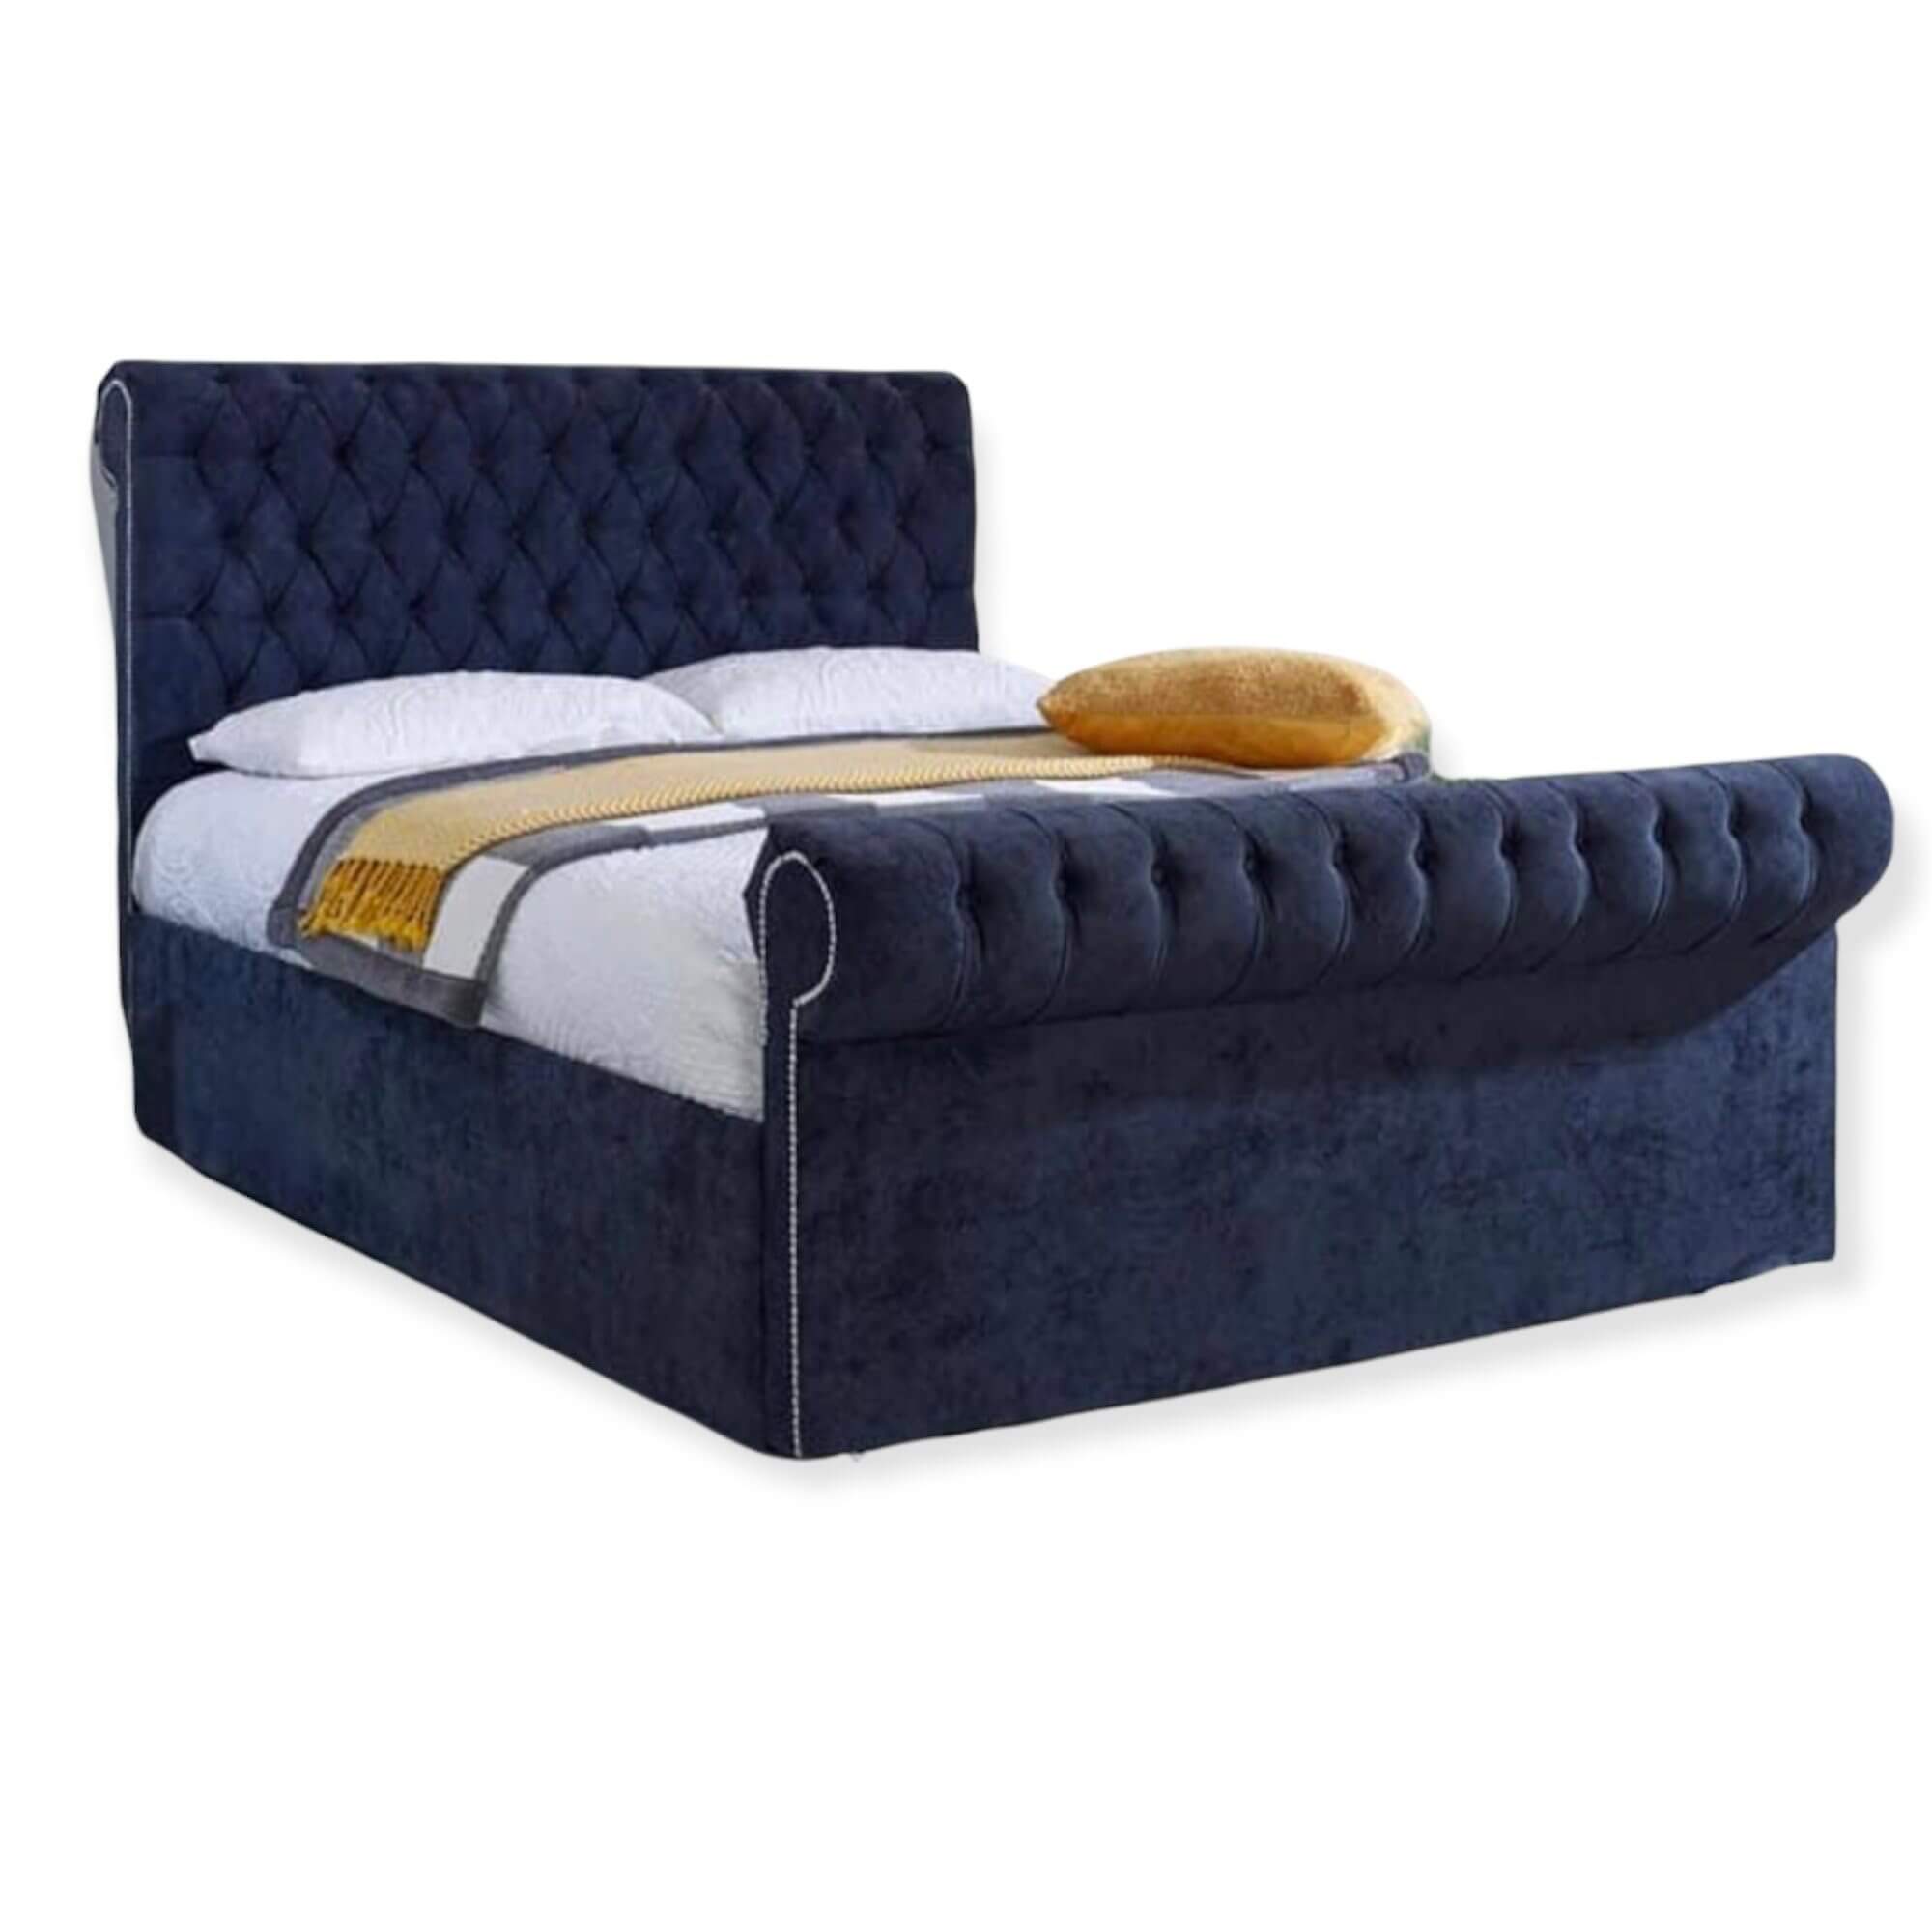 Britainsleep Sleigh Gaskell Upholstered Ottoman Storage Bed Frame | Double | Single | Small Double | KingSize | Super King Size Bed Britainsleep